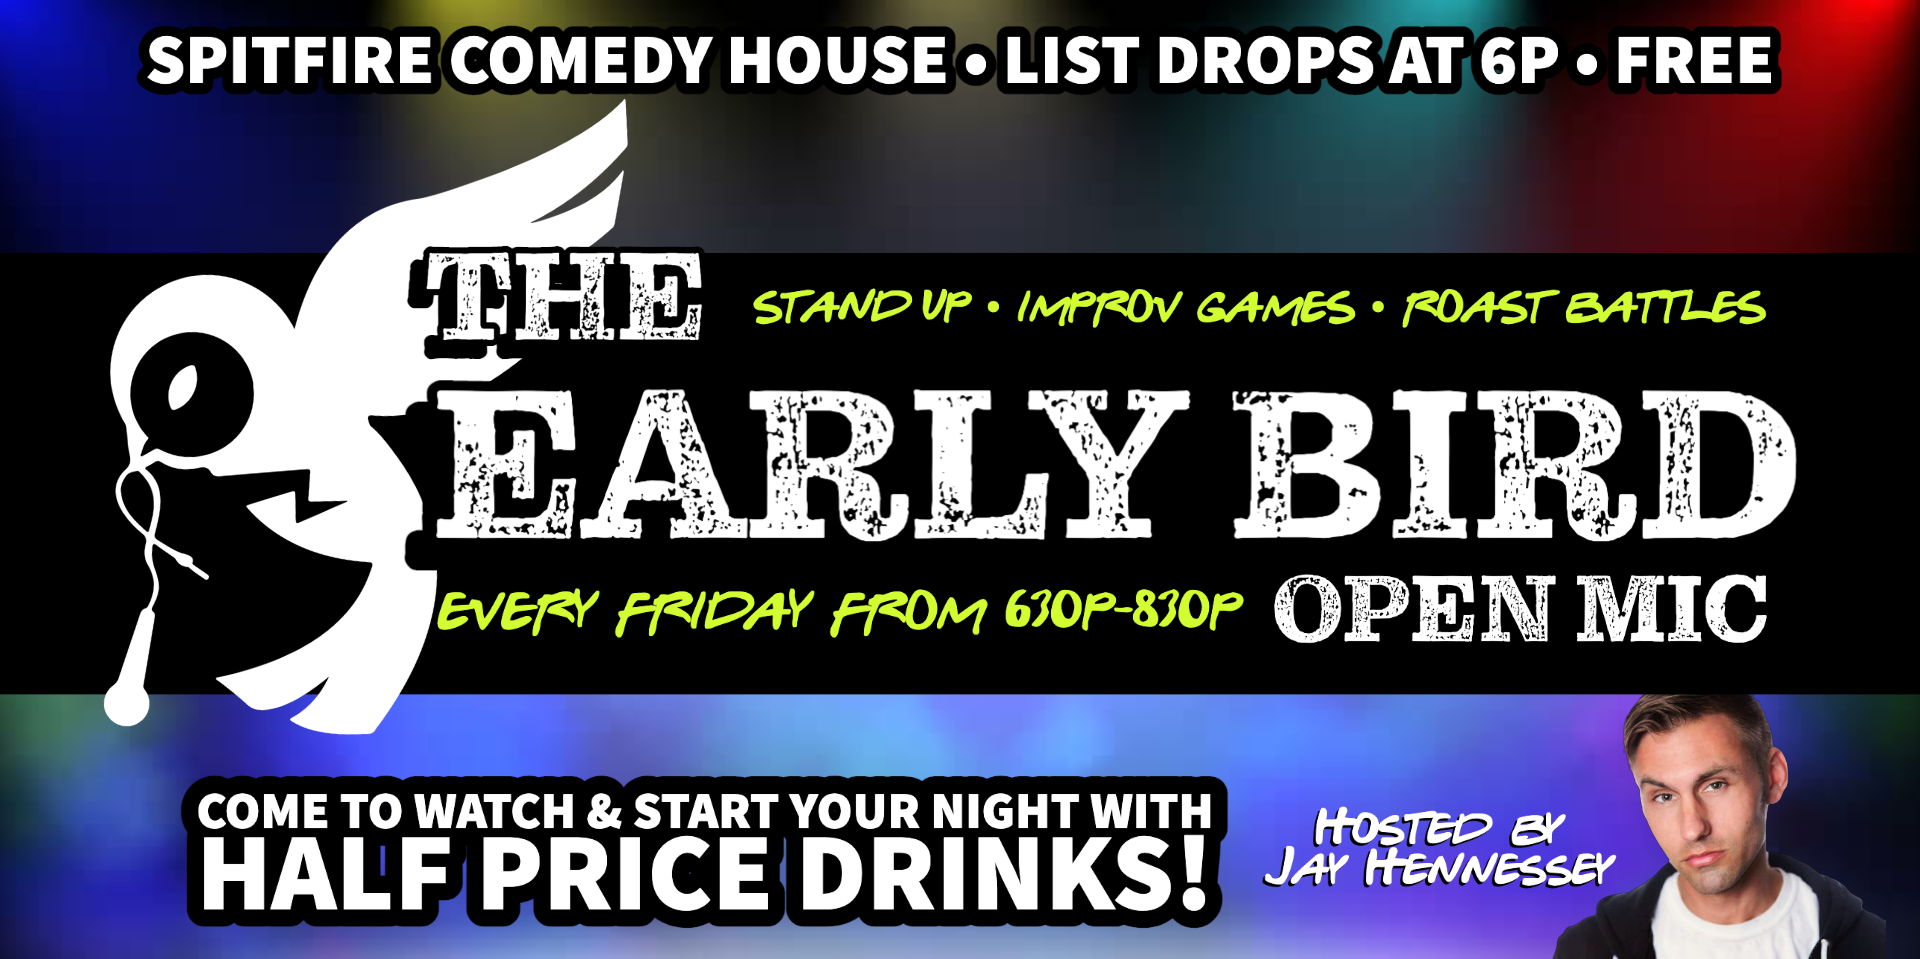 The Early Bird Open Mic promotional image